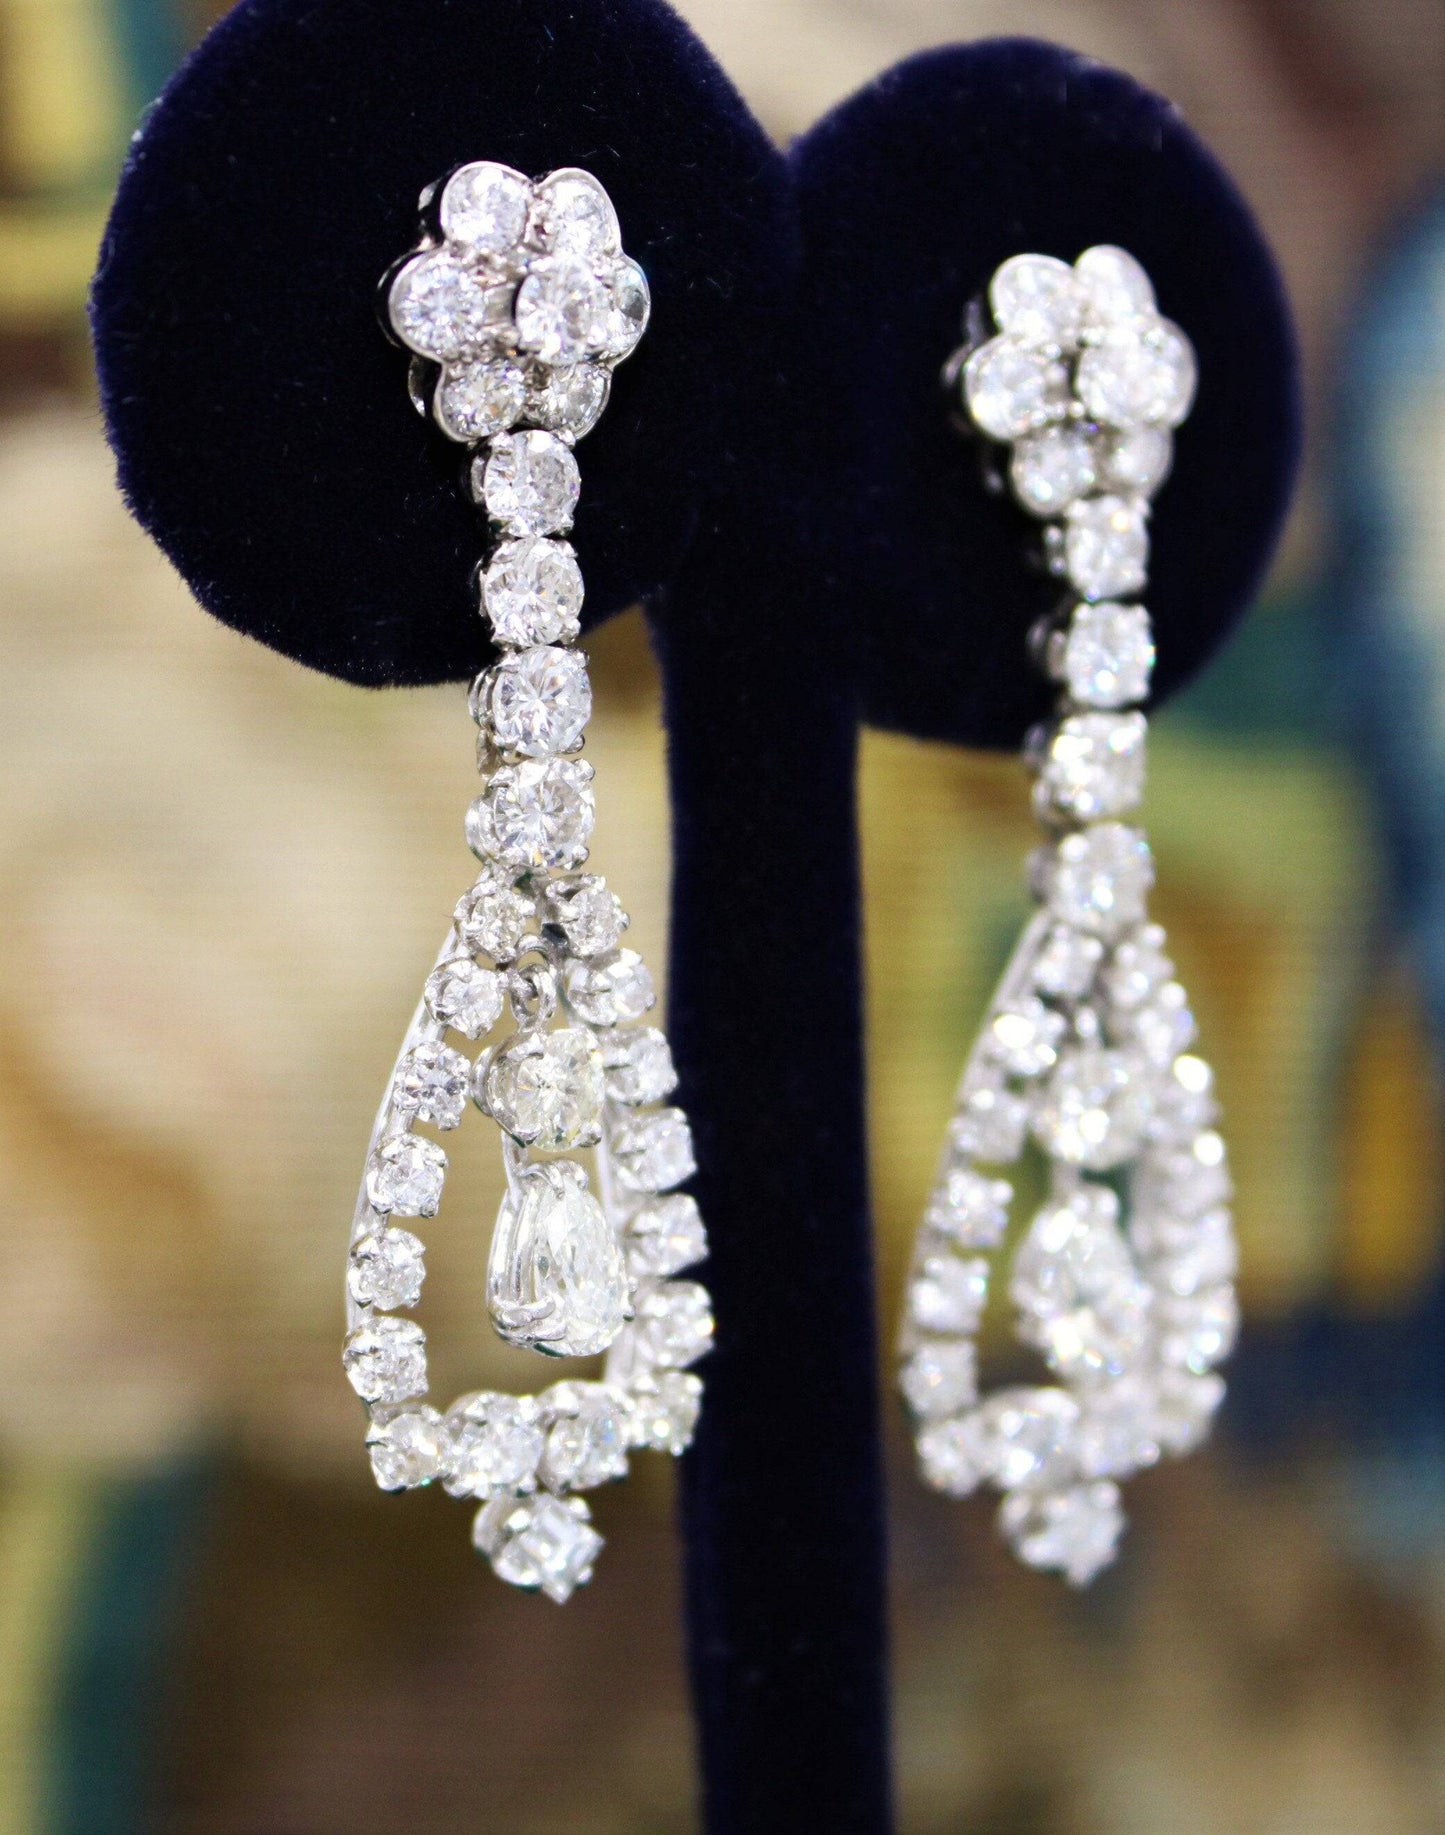 A magnificent pair of 8.30ct Diamond Drop Earrings set in 18ct White Gold, Circa 1955 - Robin Haydock Antiques